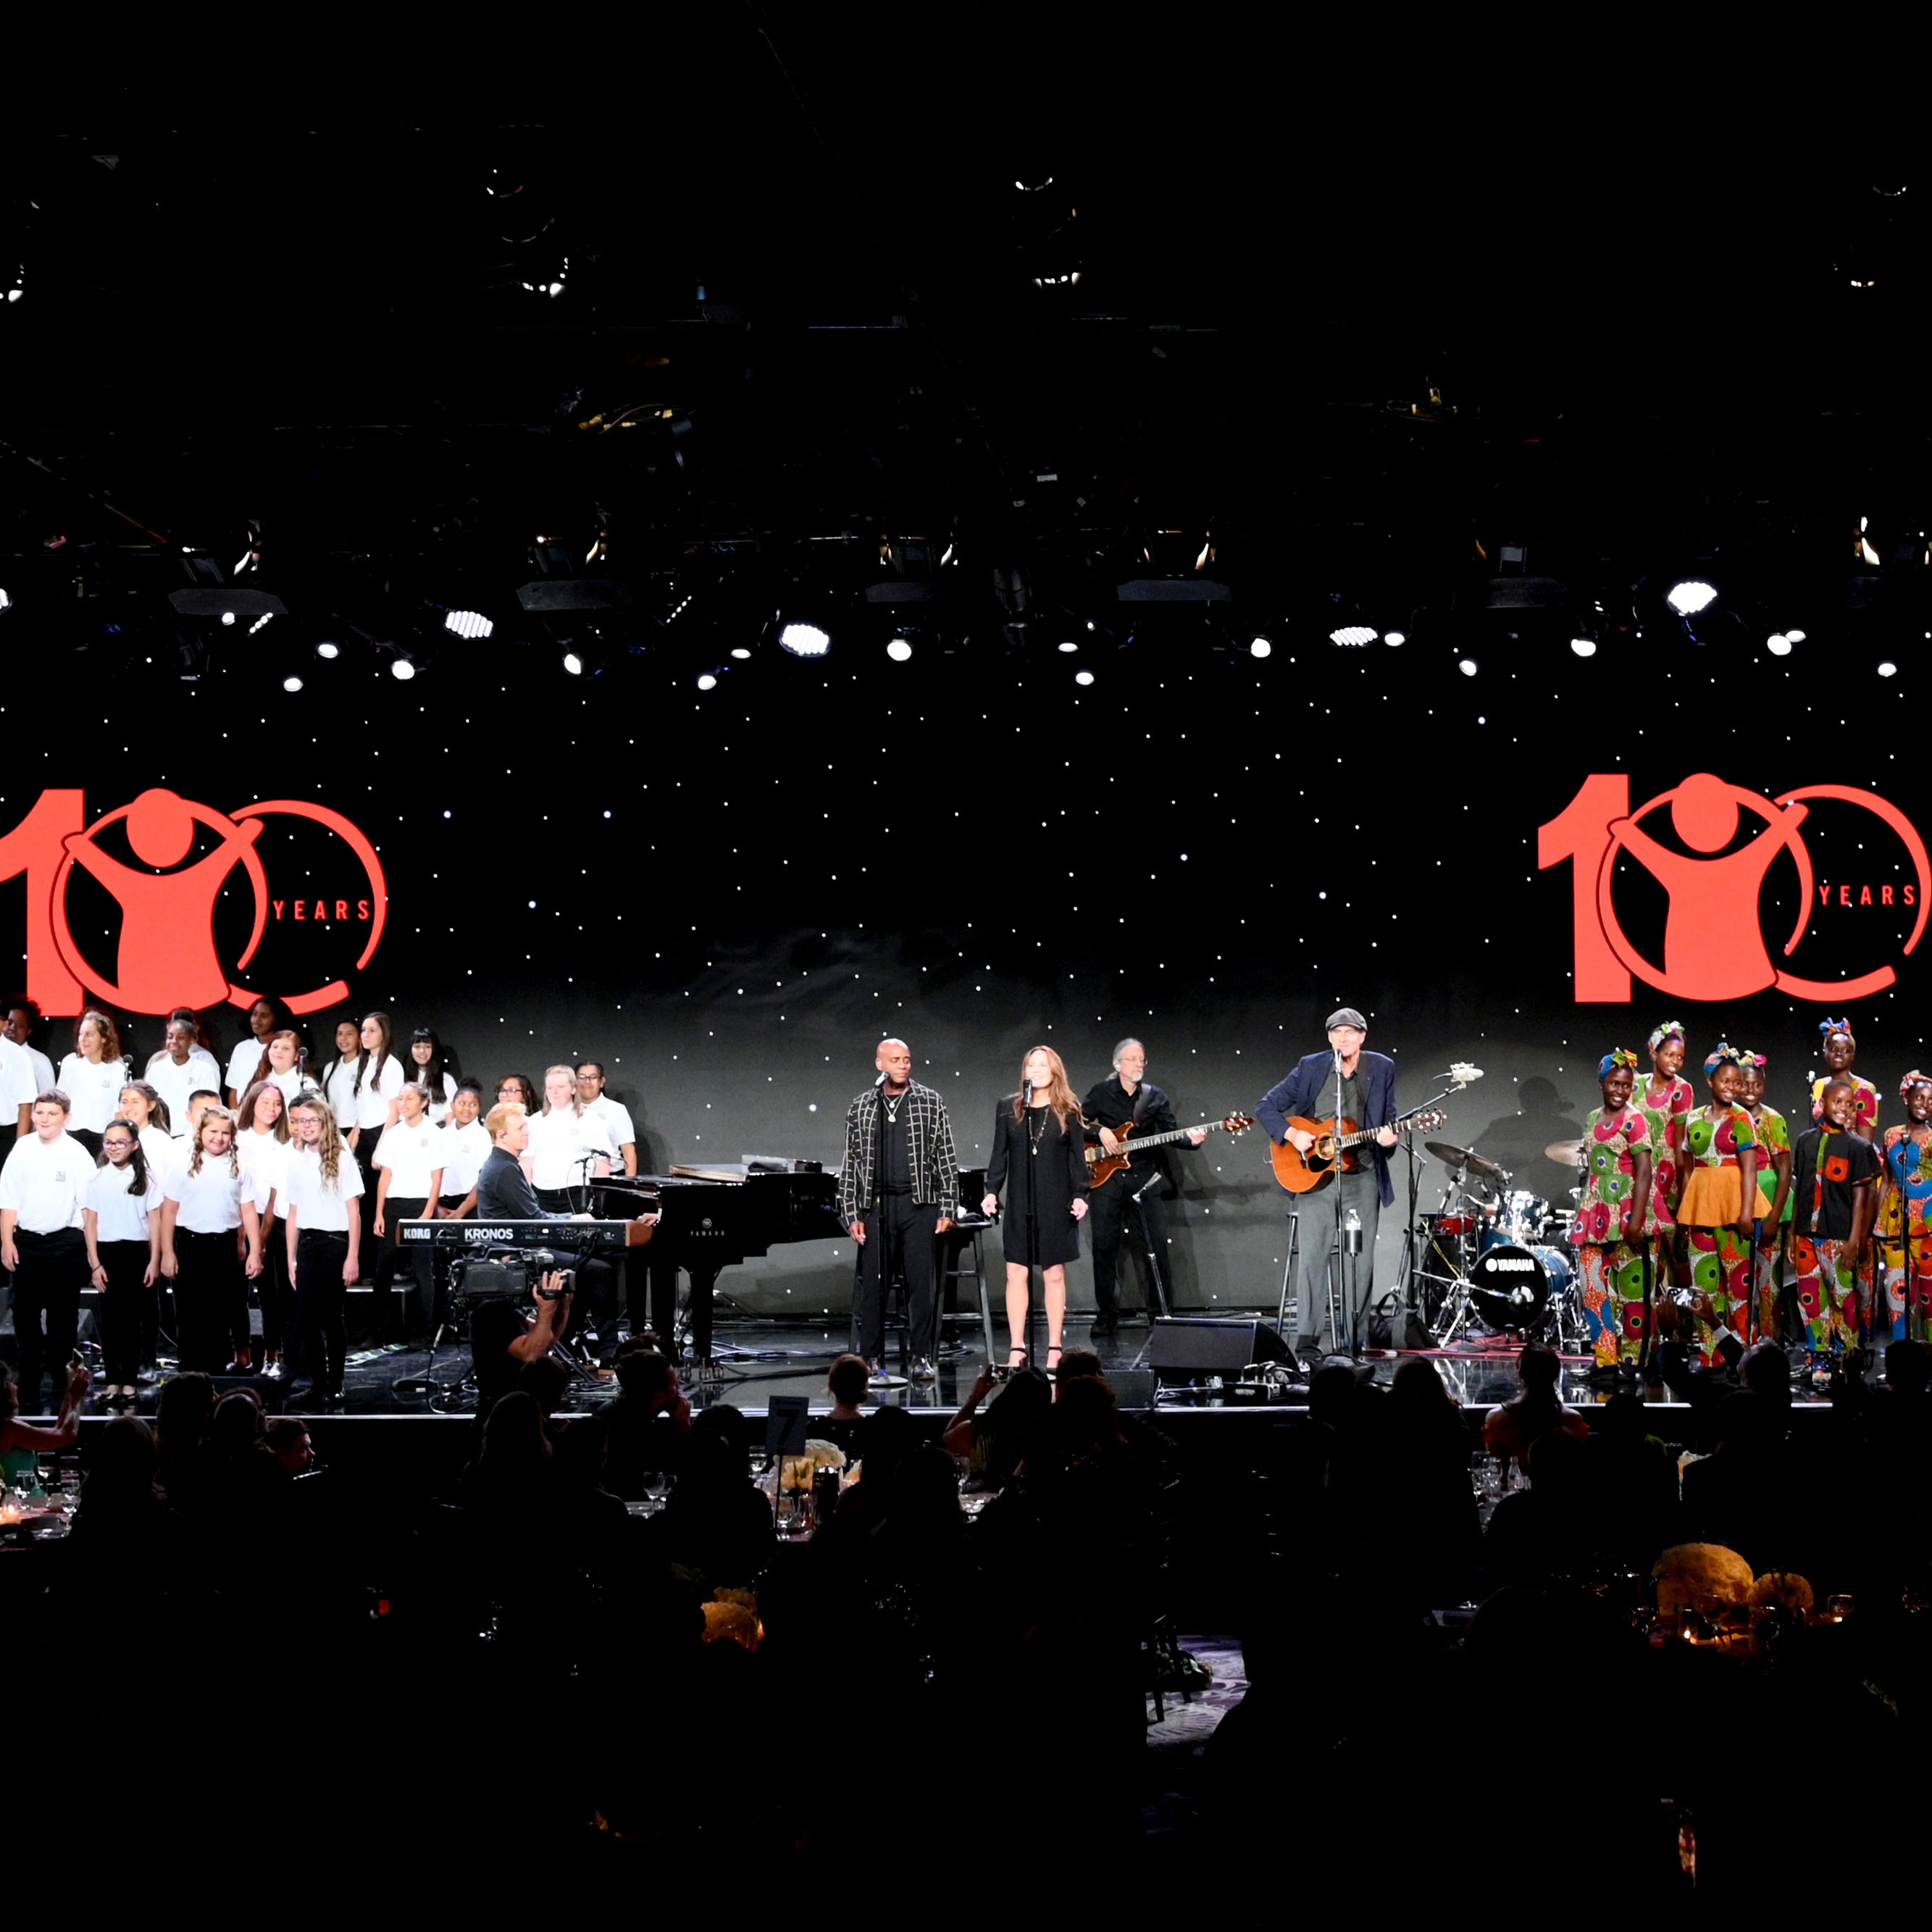 James Taylor performs at Save the Children's Centennial Celebration: Once in a Lifetime at The Beverly Hilton Hotel on October 2, 2019 in Beverly Hills, California. (Photo by Andrew Toth/Getty Images for Save The Children).